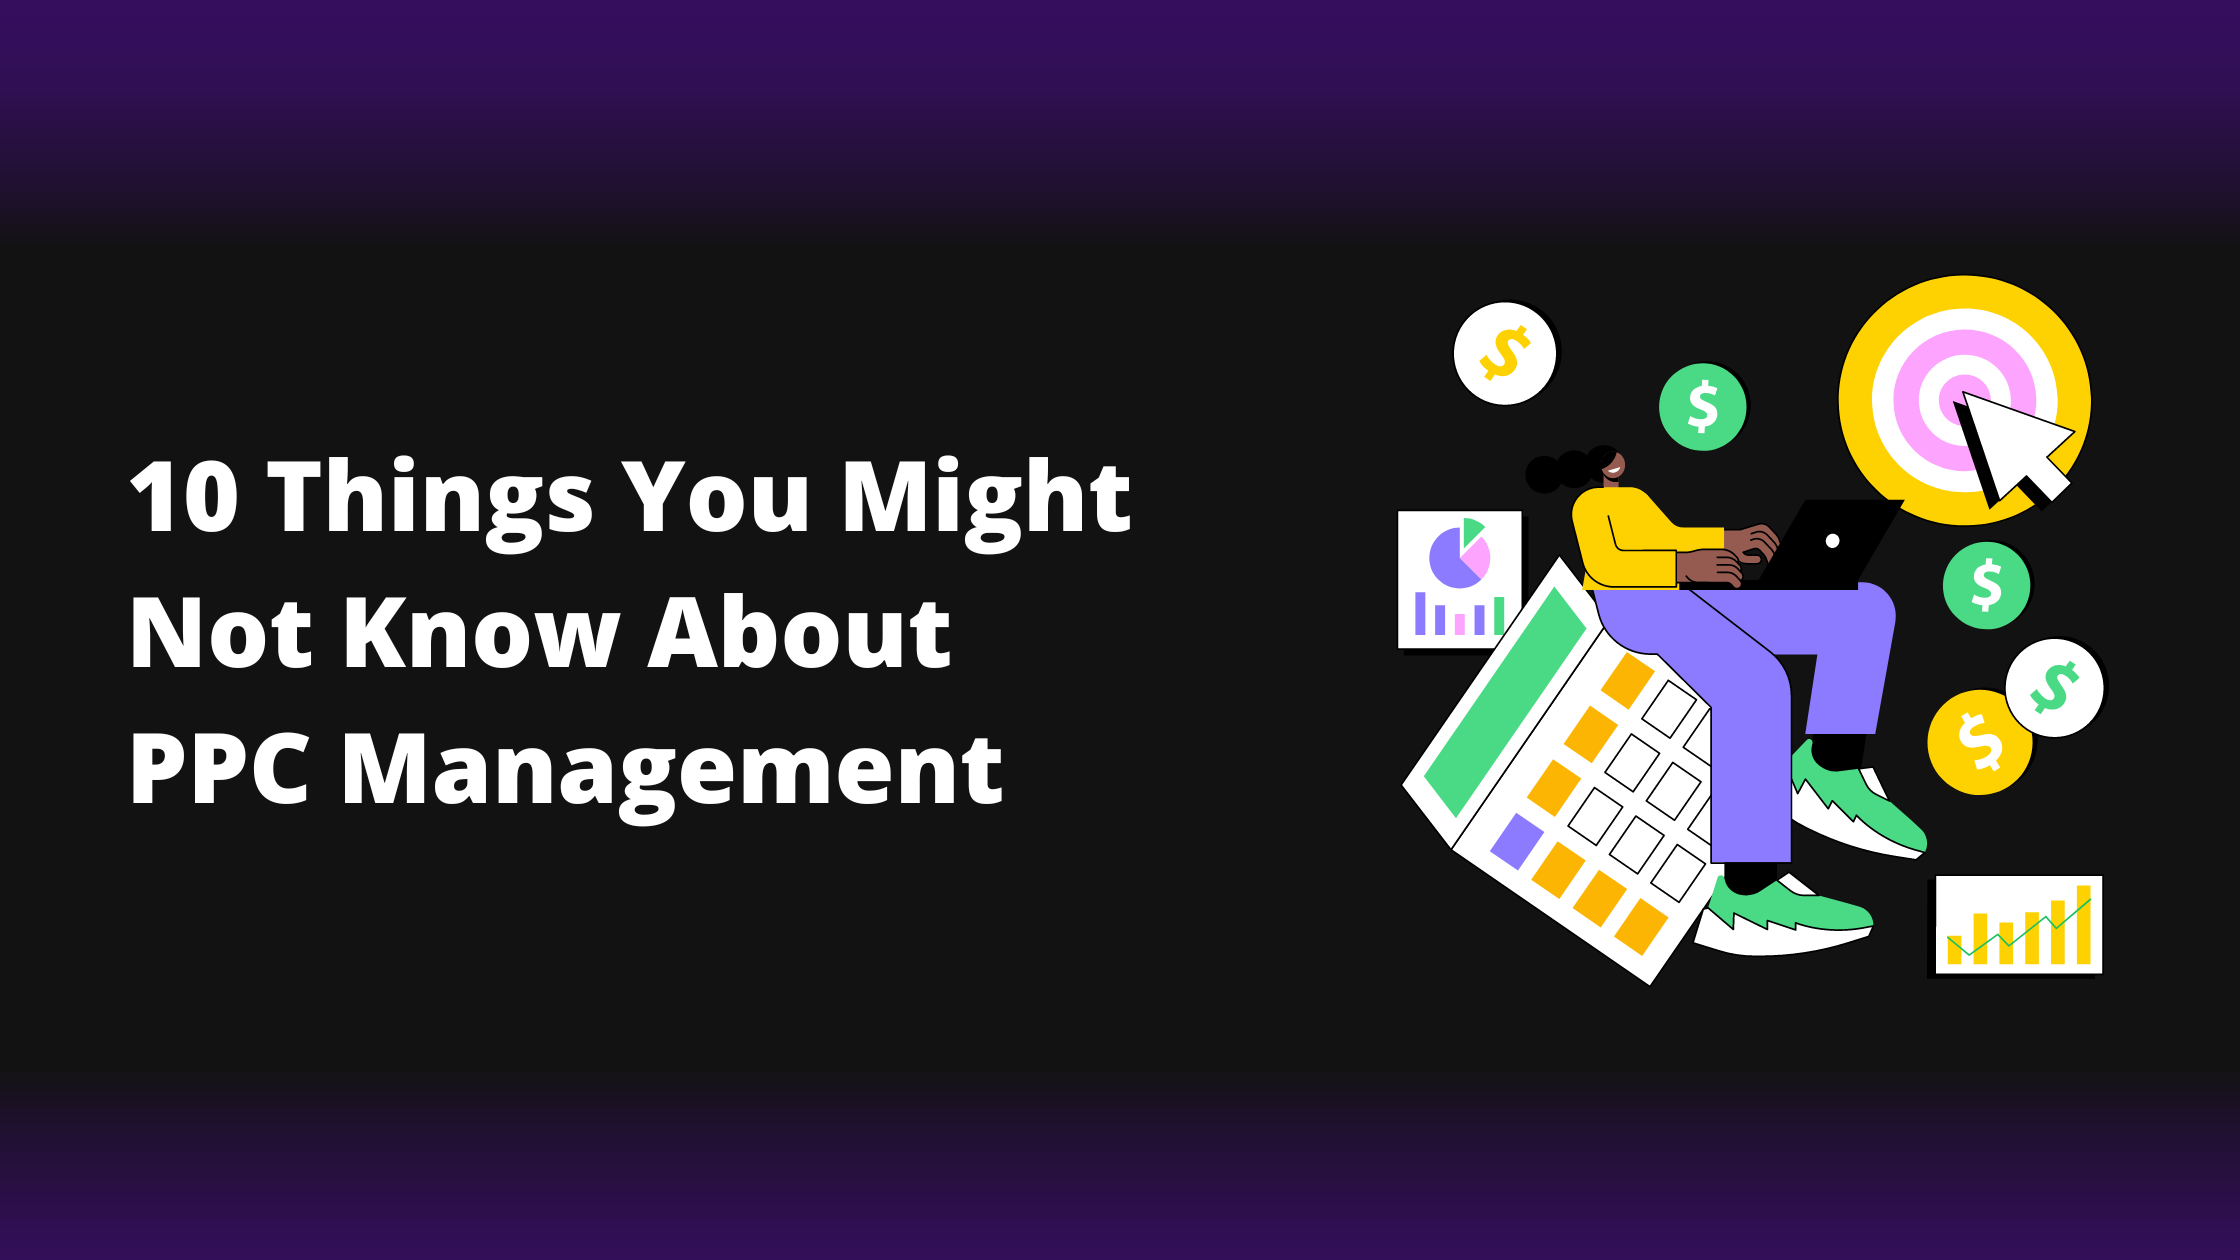 10 things you might not know about PPC Management